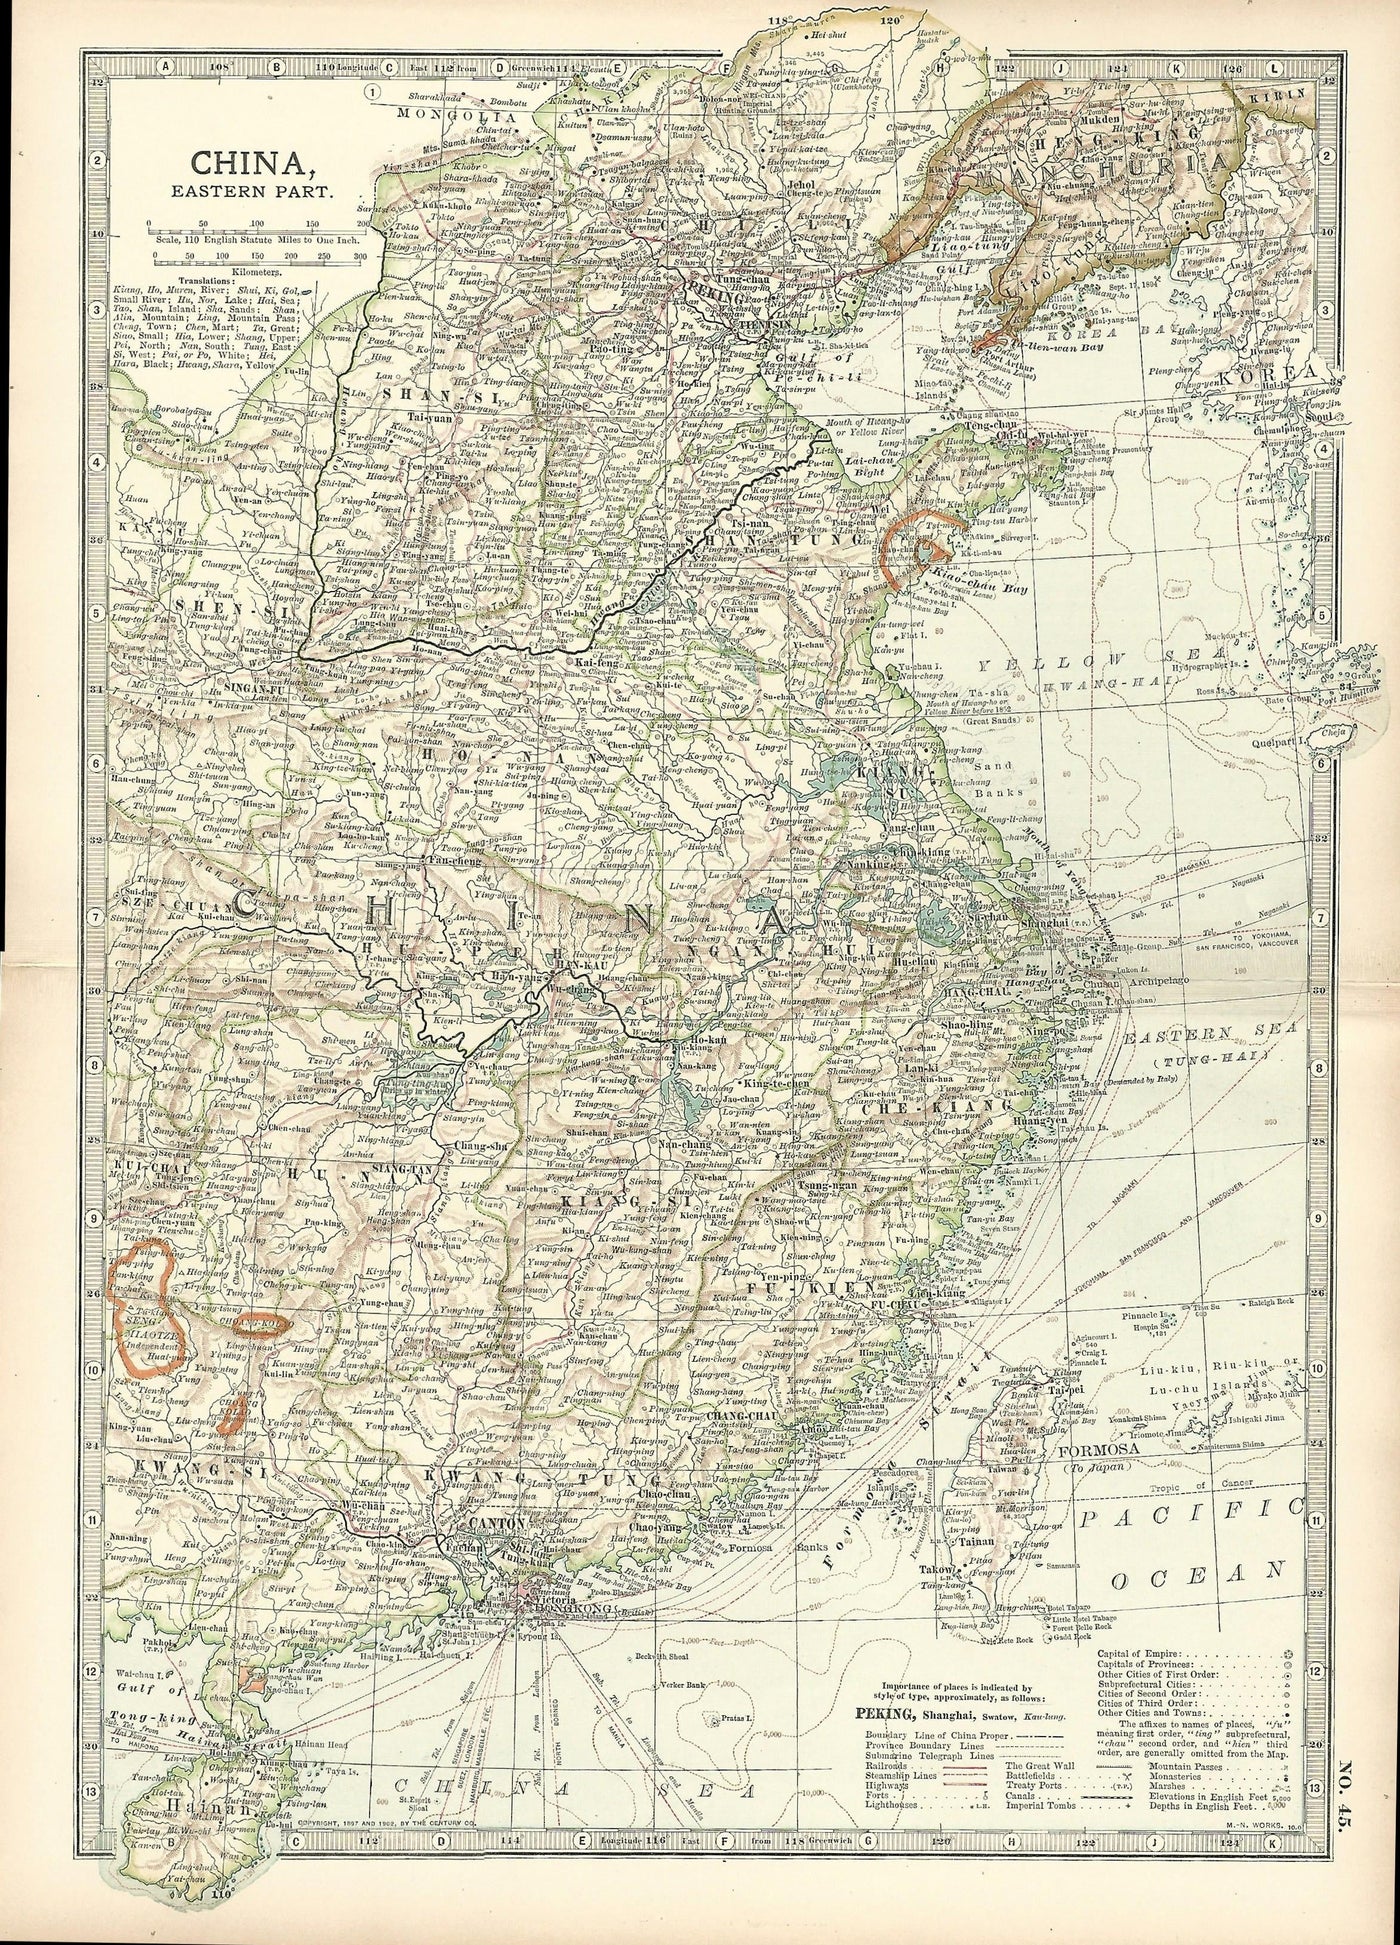 China Eastern Part antique map,Encyclopaedia Britannica 1903